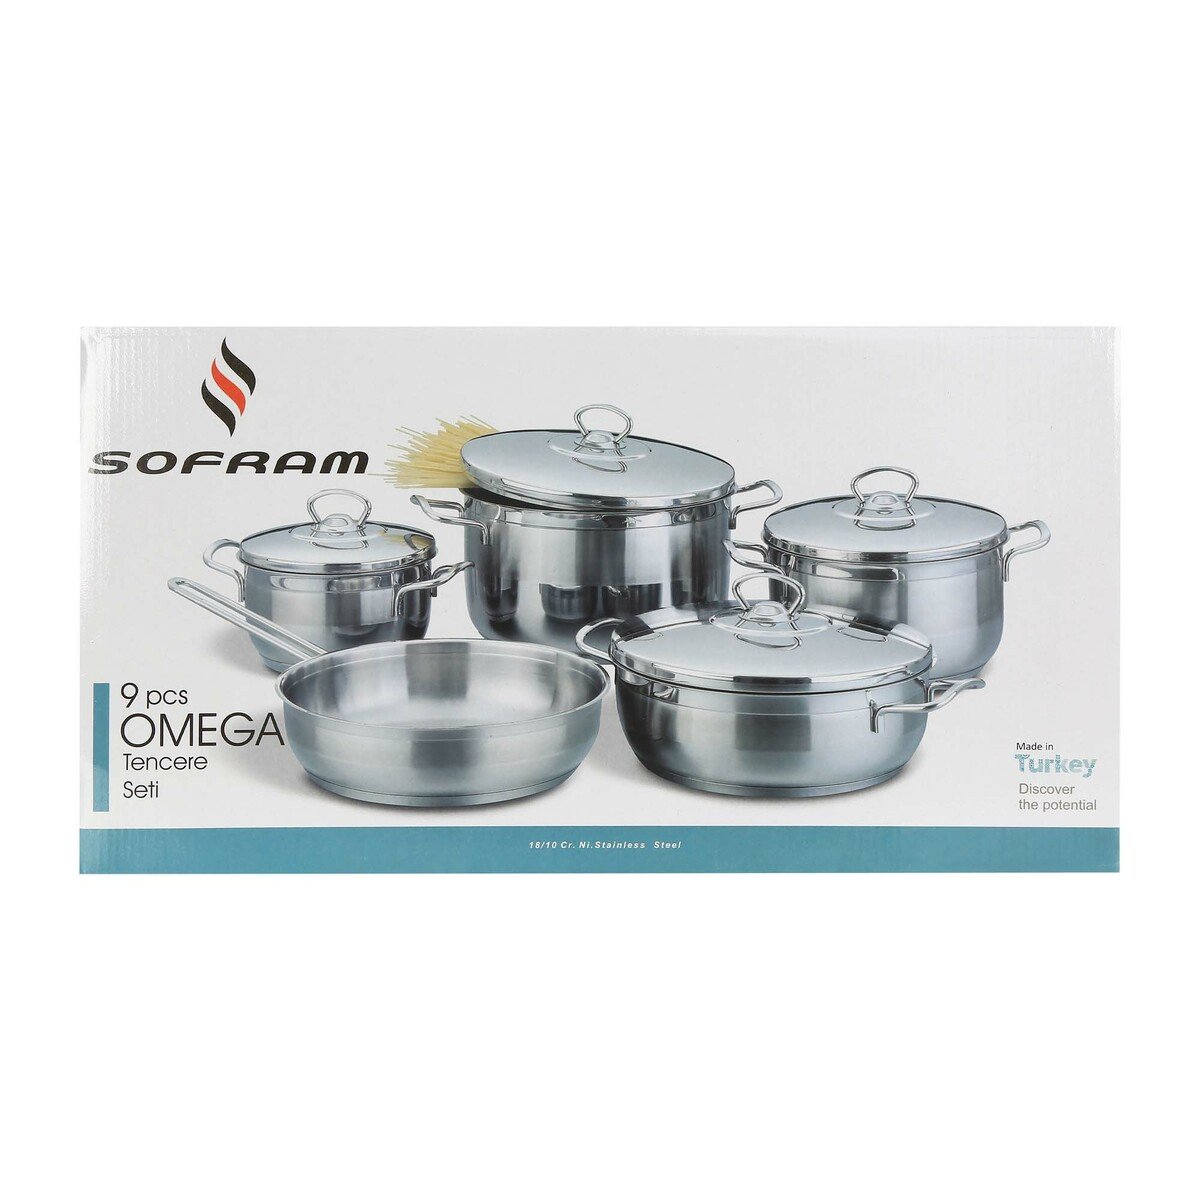 Sofram Stainless Steel Cookware Set 9Pcs Omega Made In Turkey